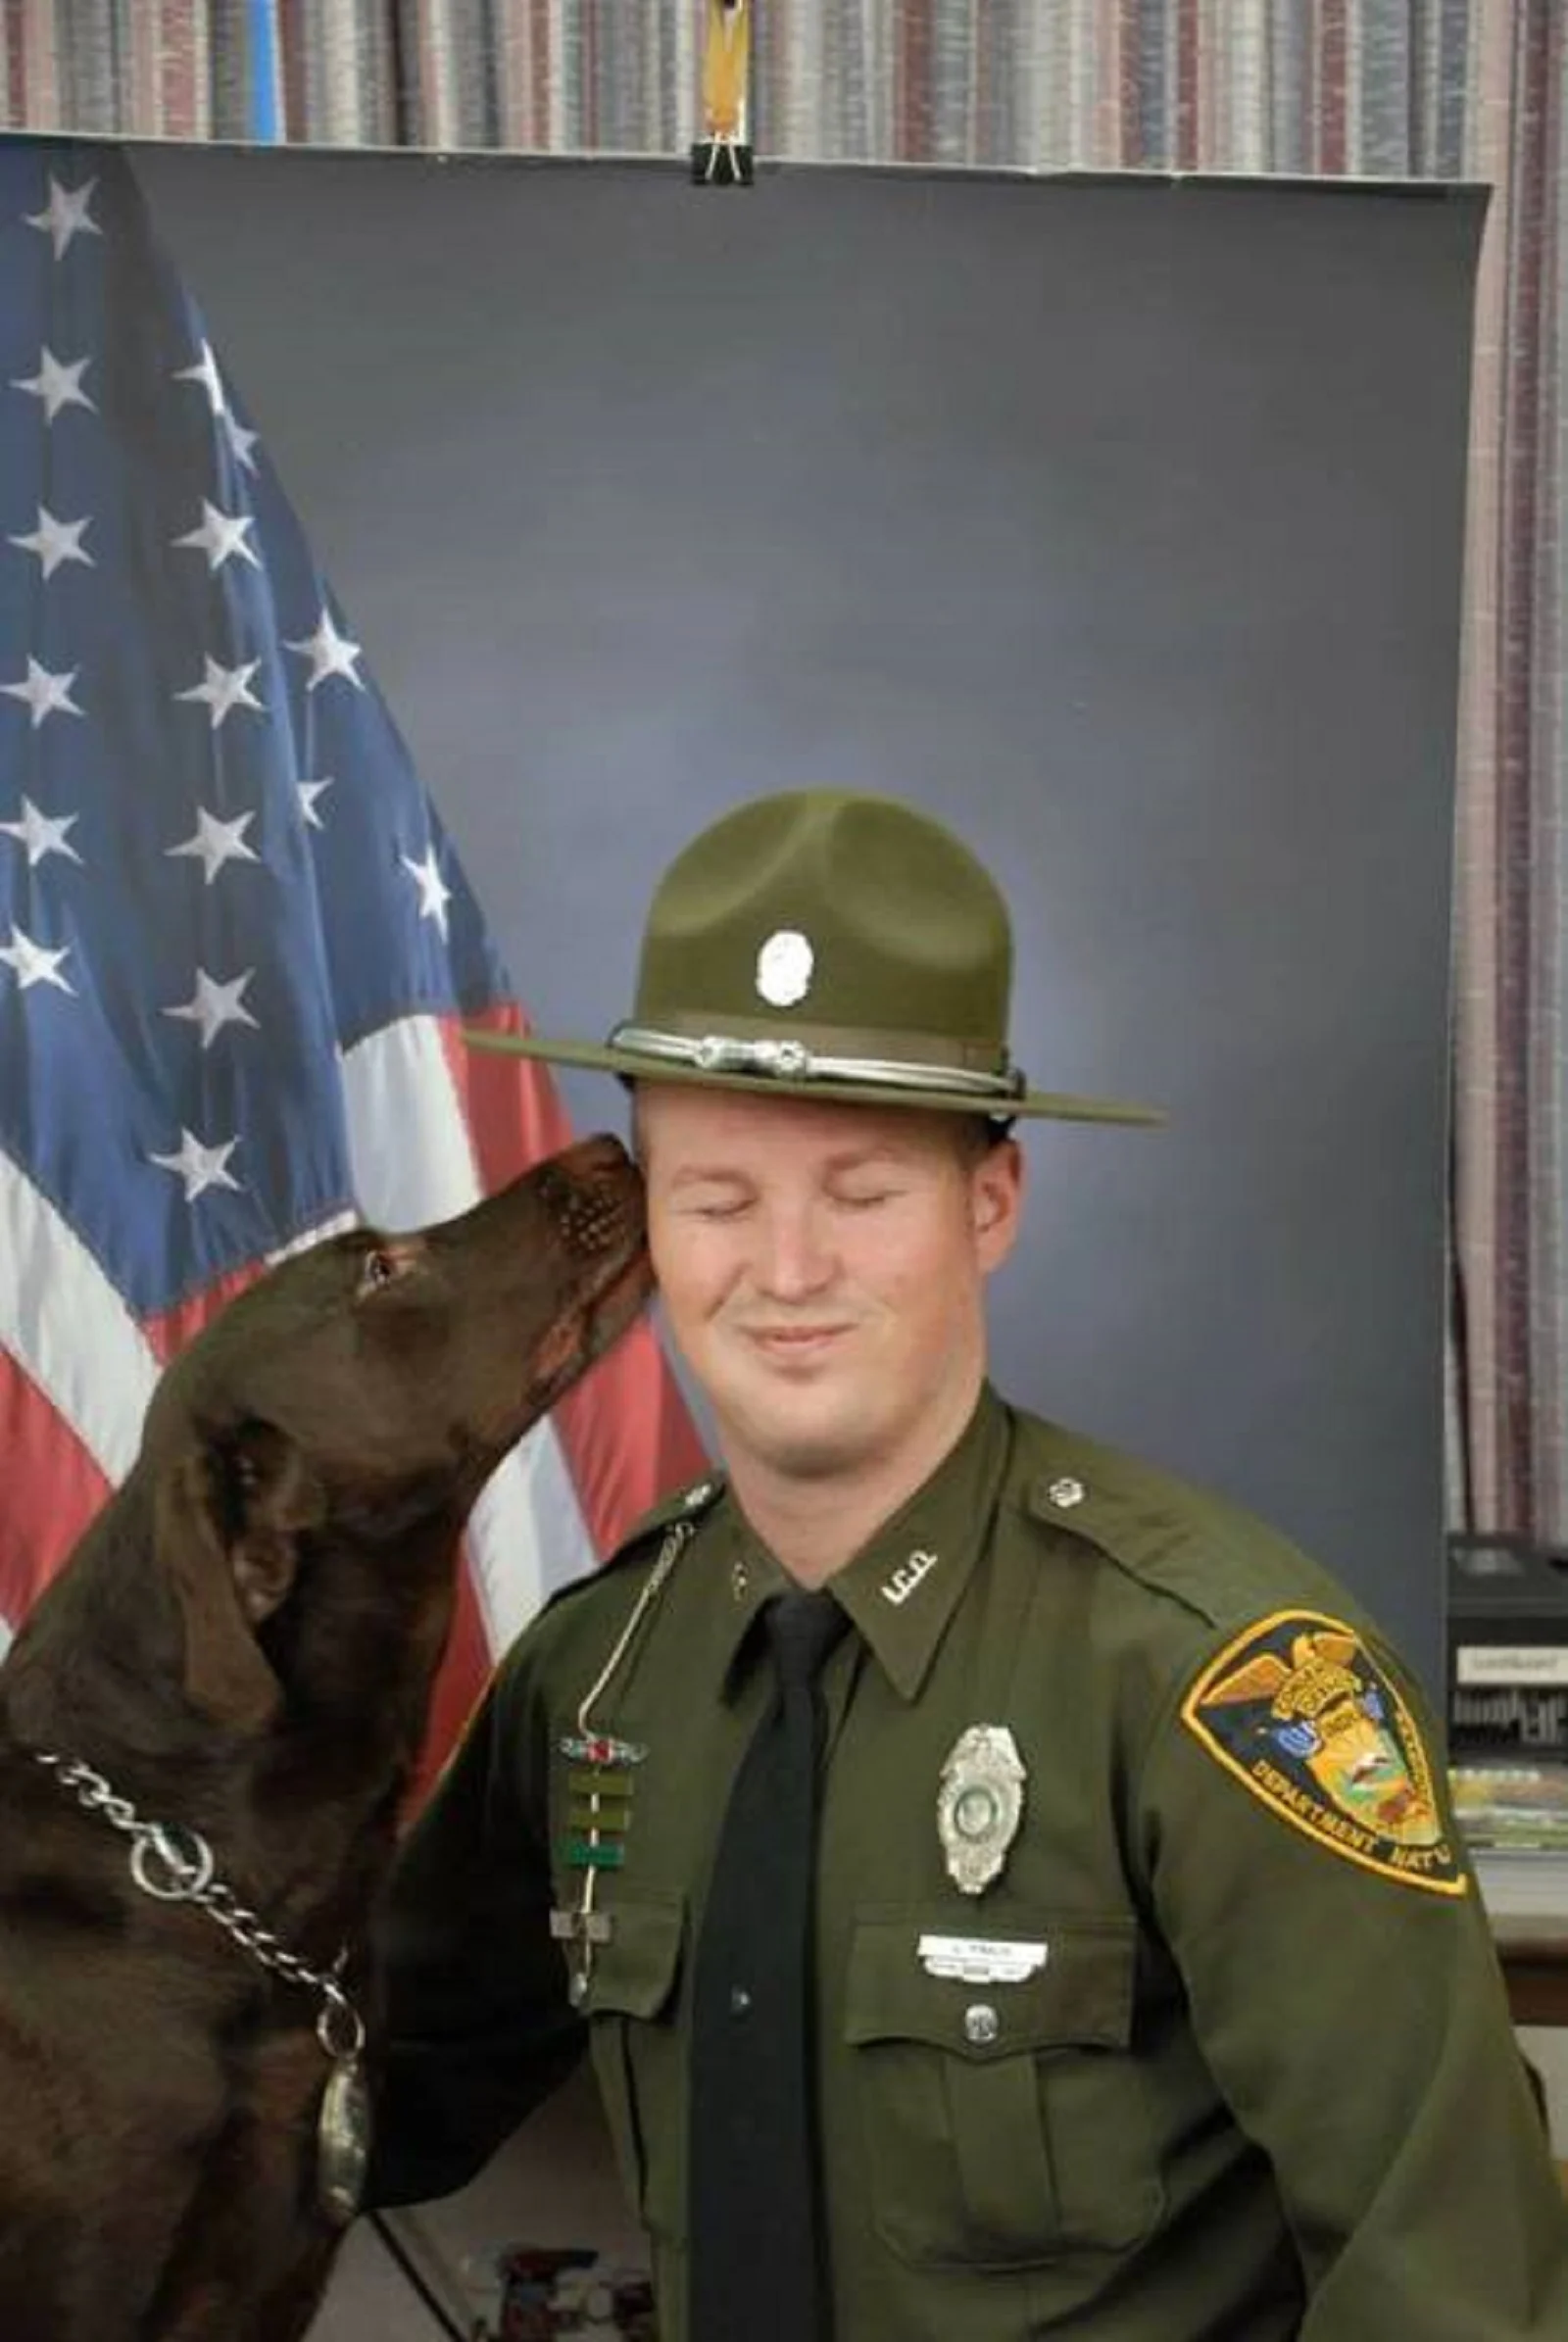 dog licking police officer during photoshoot